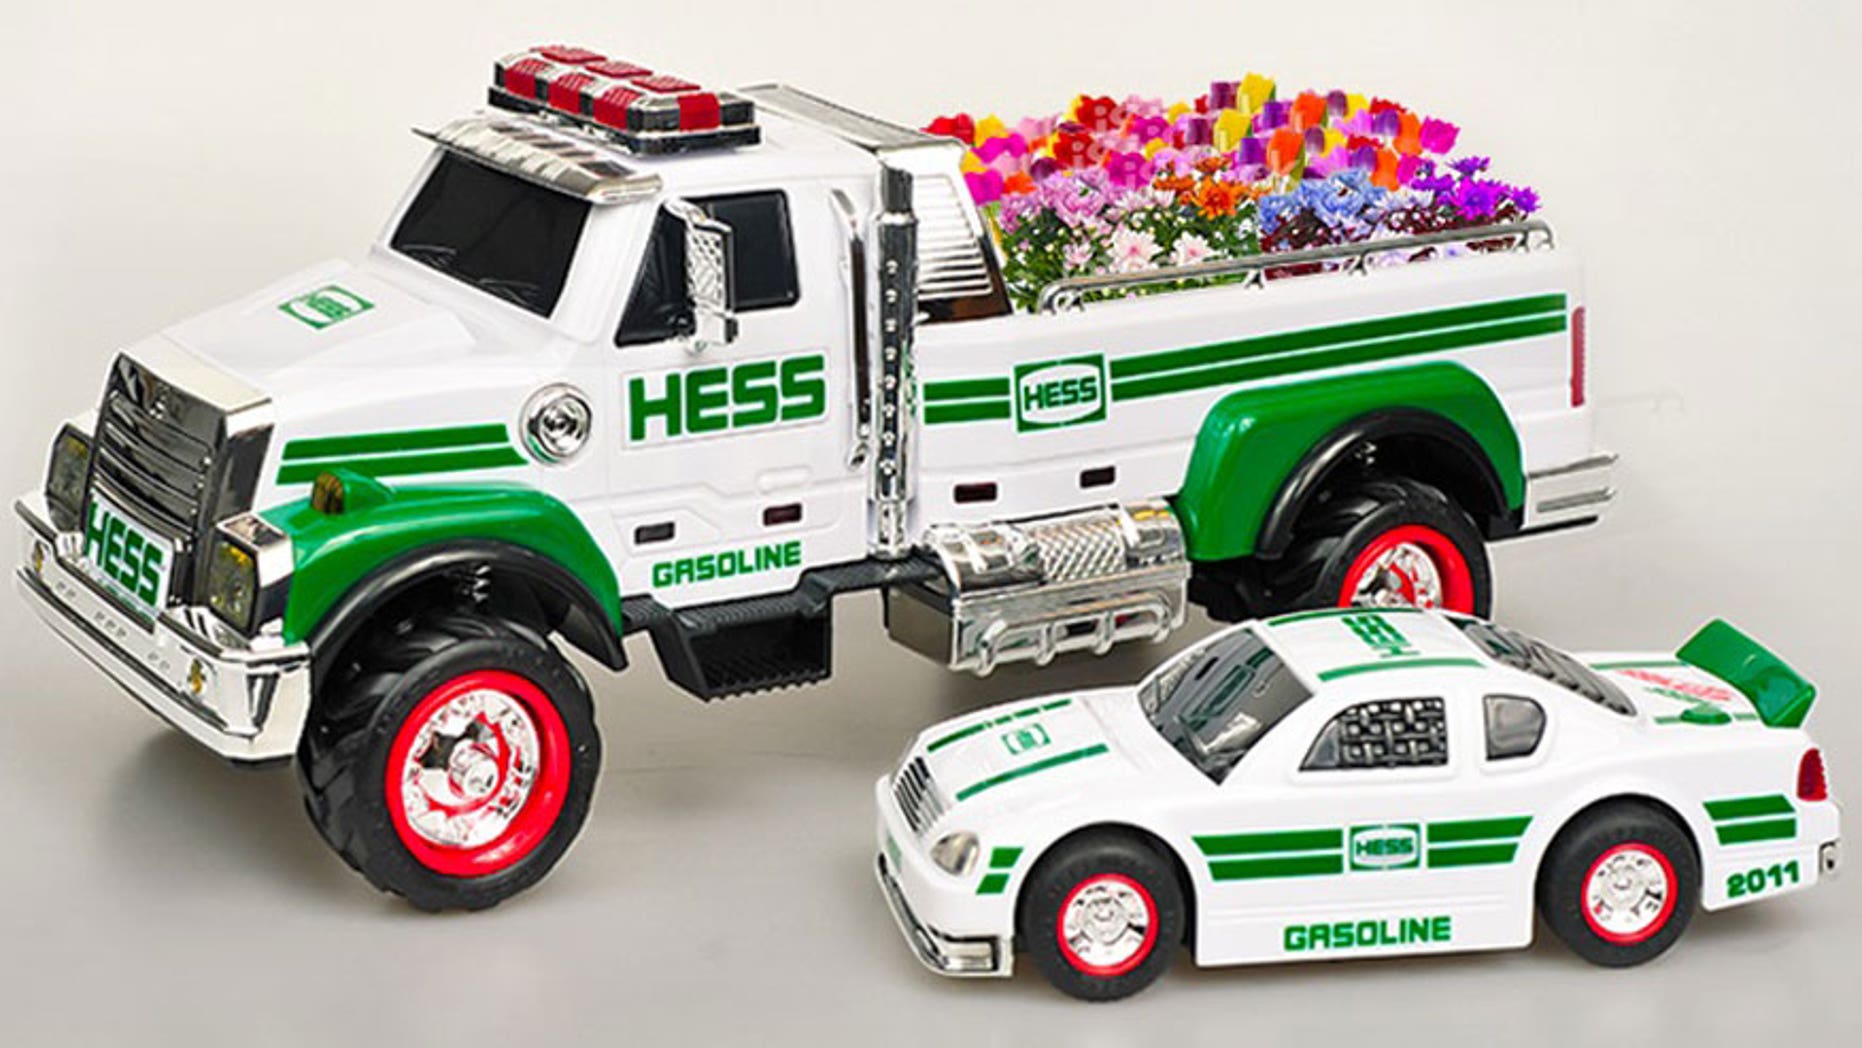 Hess toy trucks are leaving the station Fox News